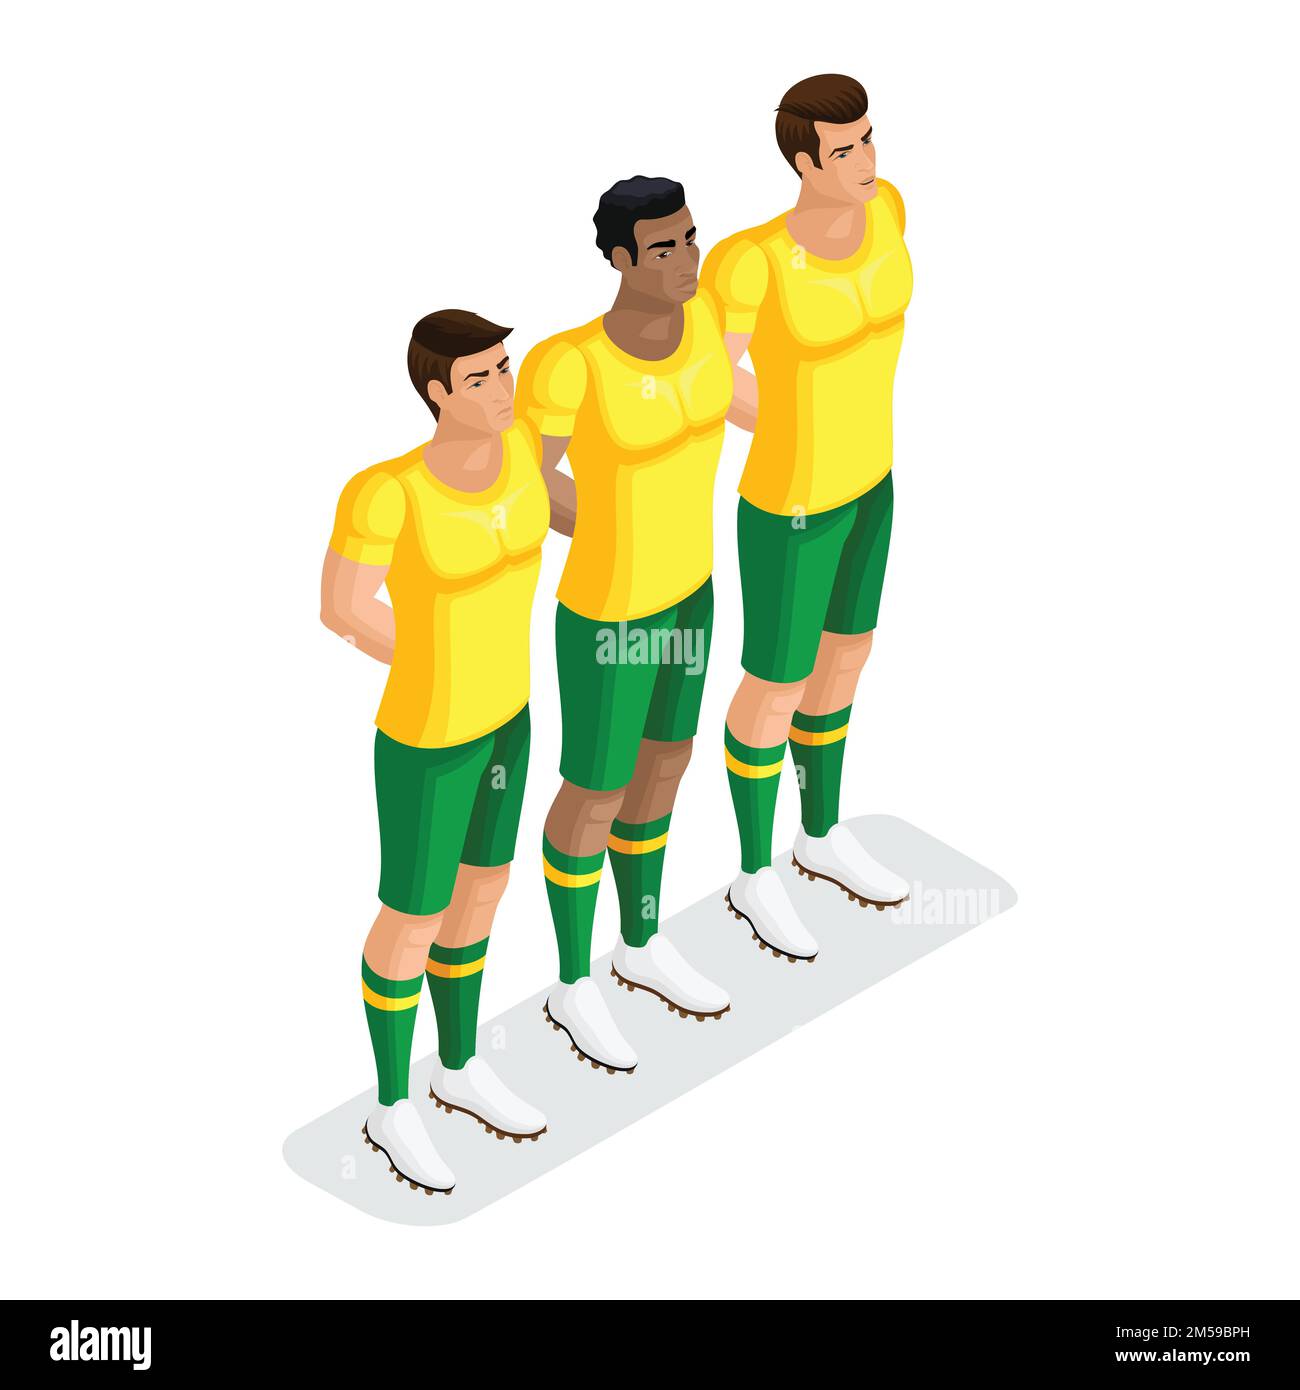 Isometric players football stand out, men of different in one team. Football match Stock Vector